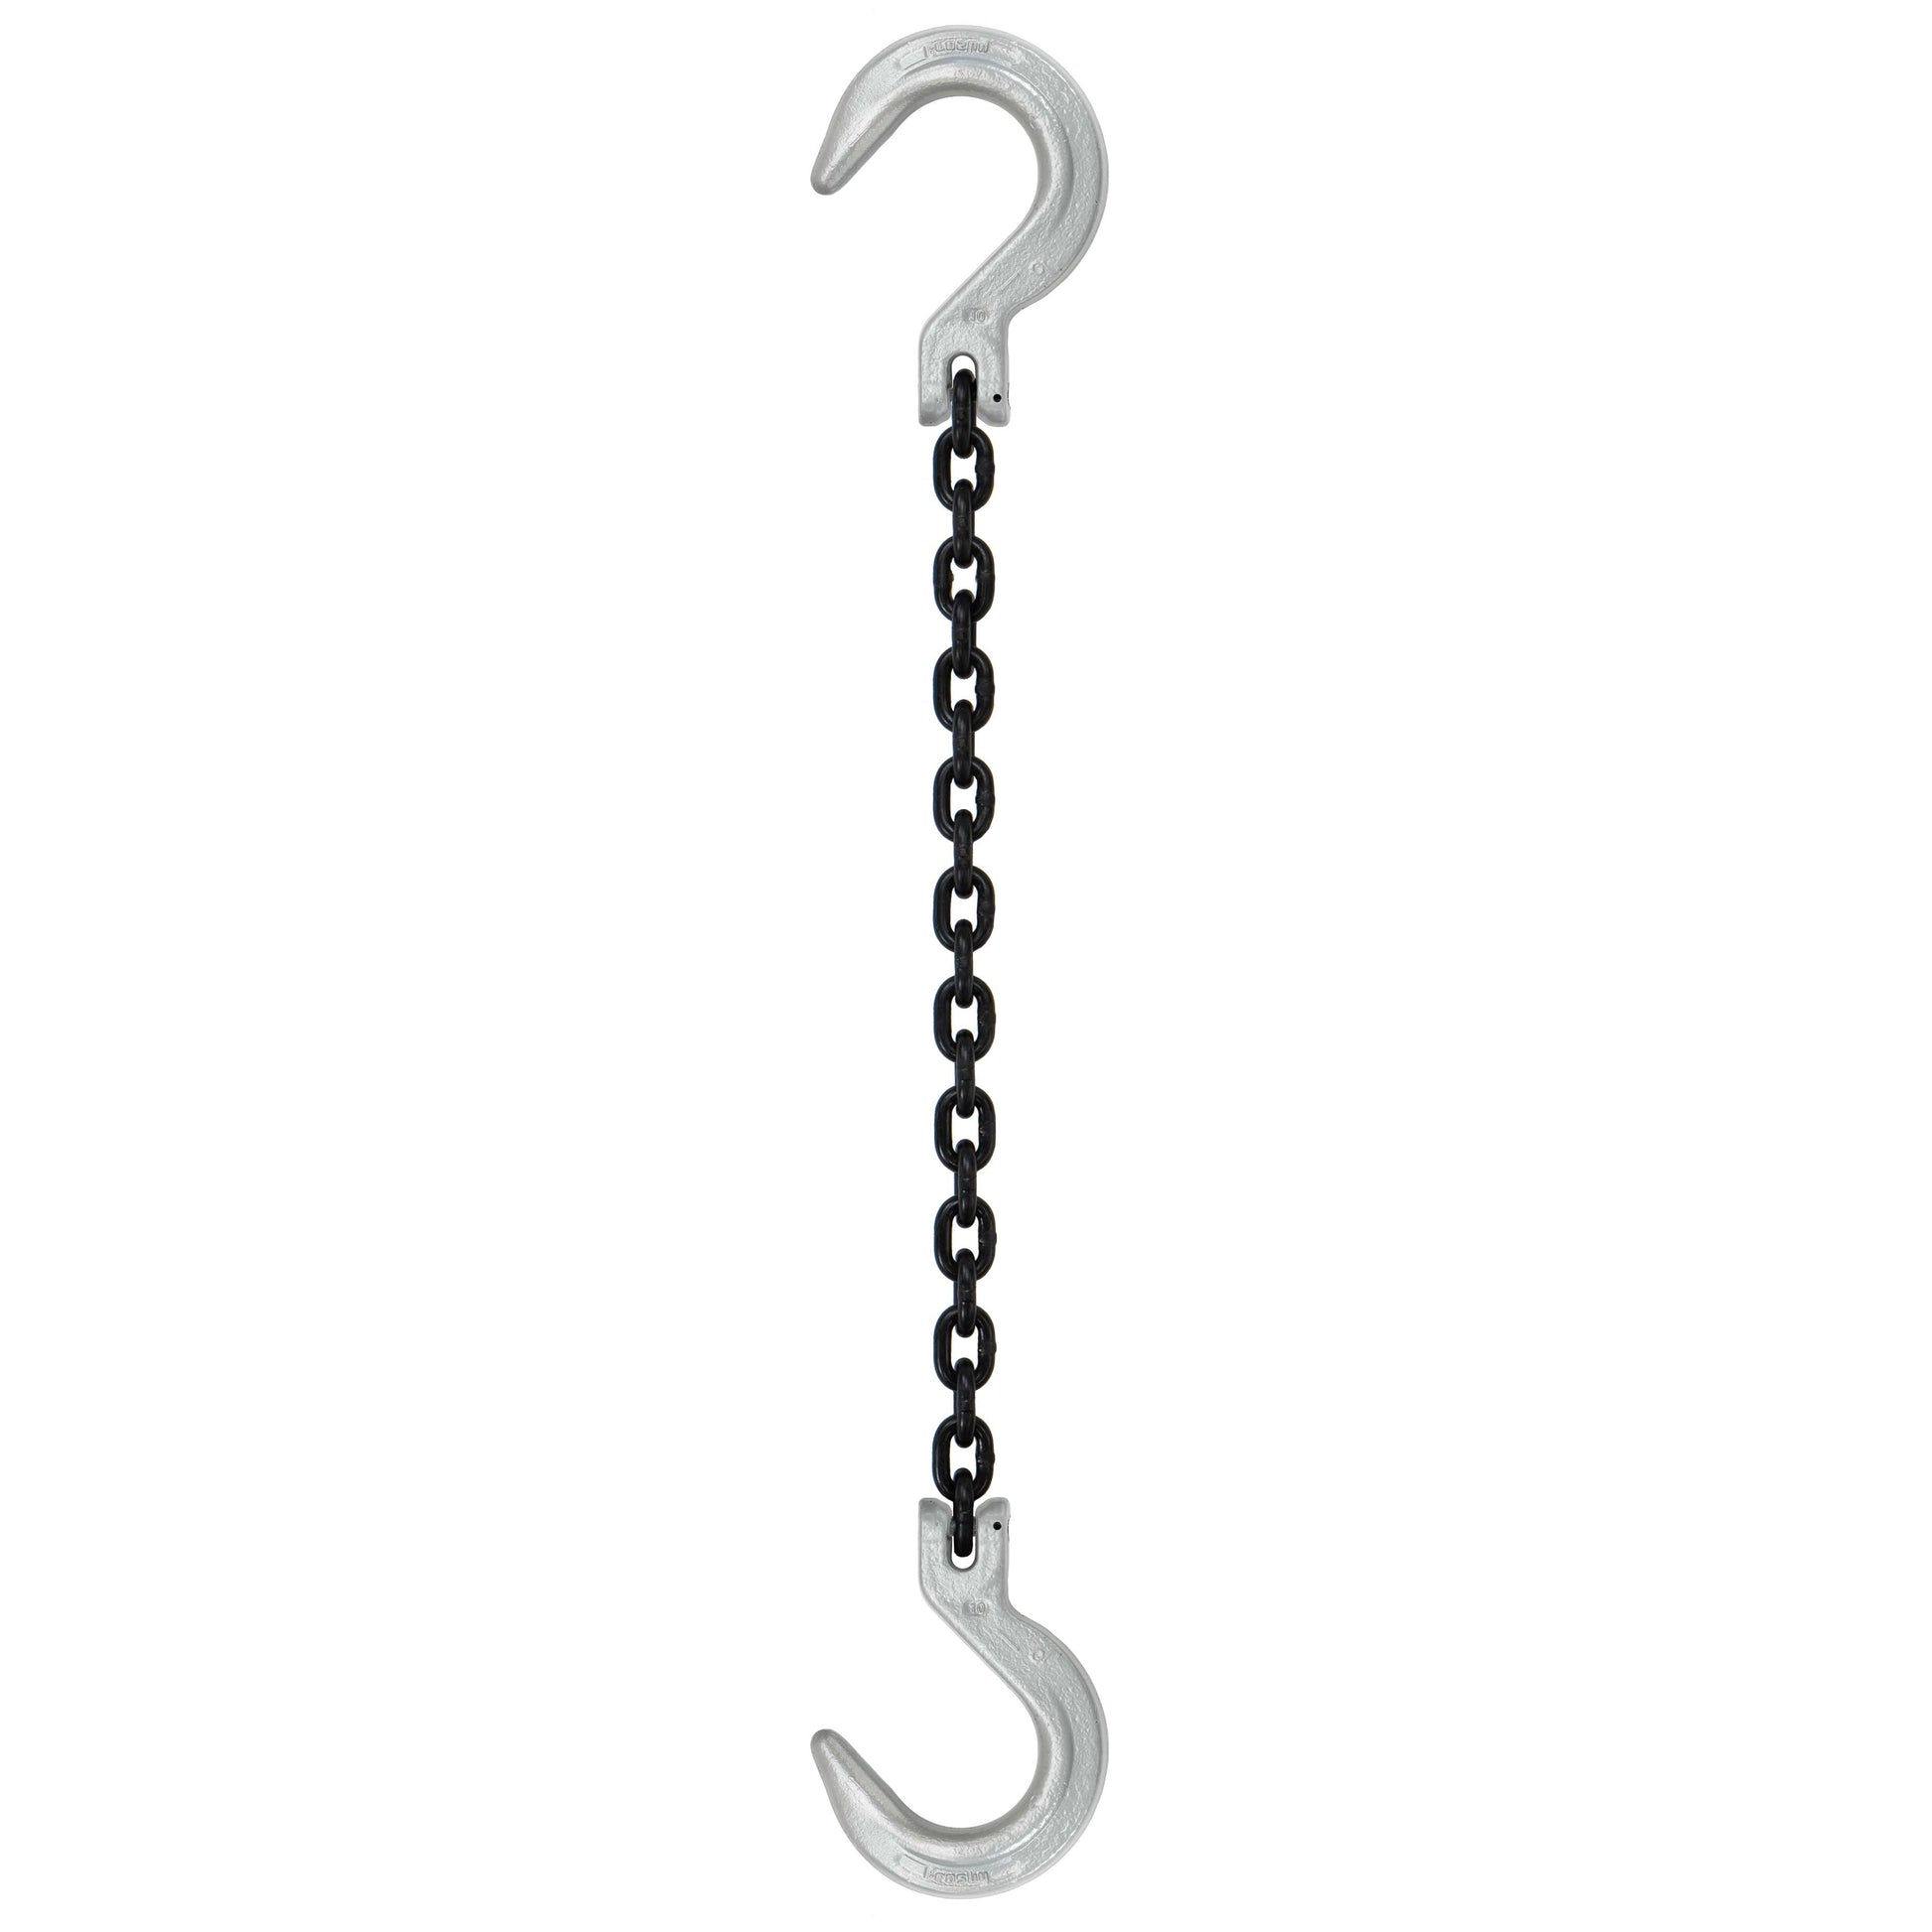 932 inch x 5 foot Domestic Single Leg Chain Sling w Crosby Foundry & Foundry Hooks Grade 100 image 1 of 2